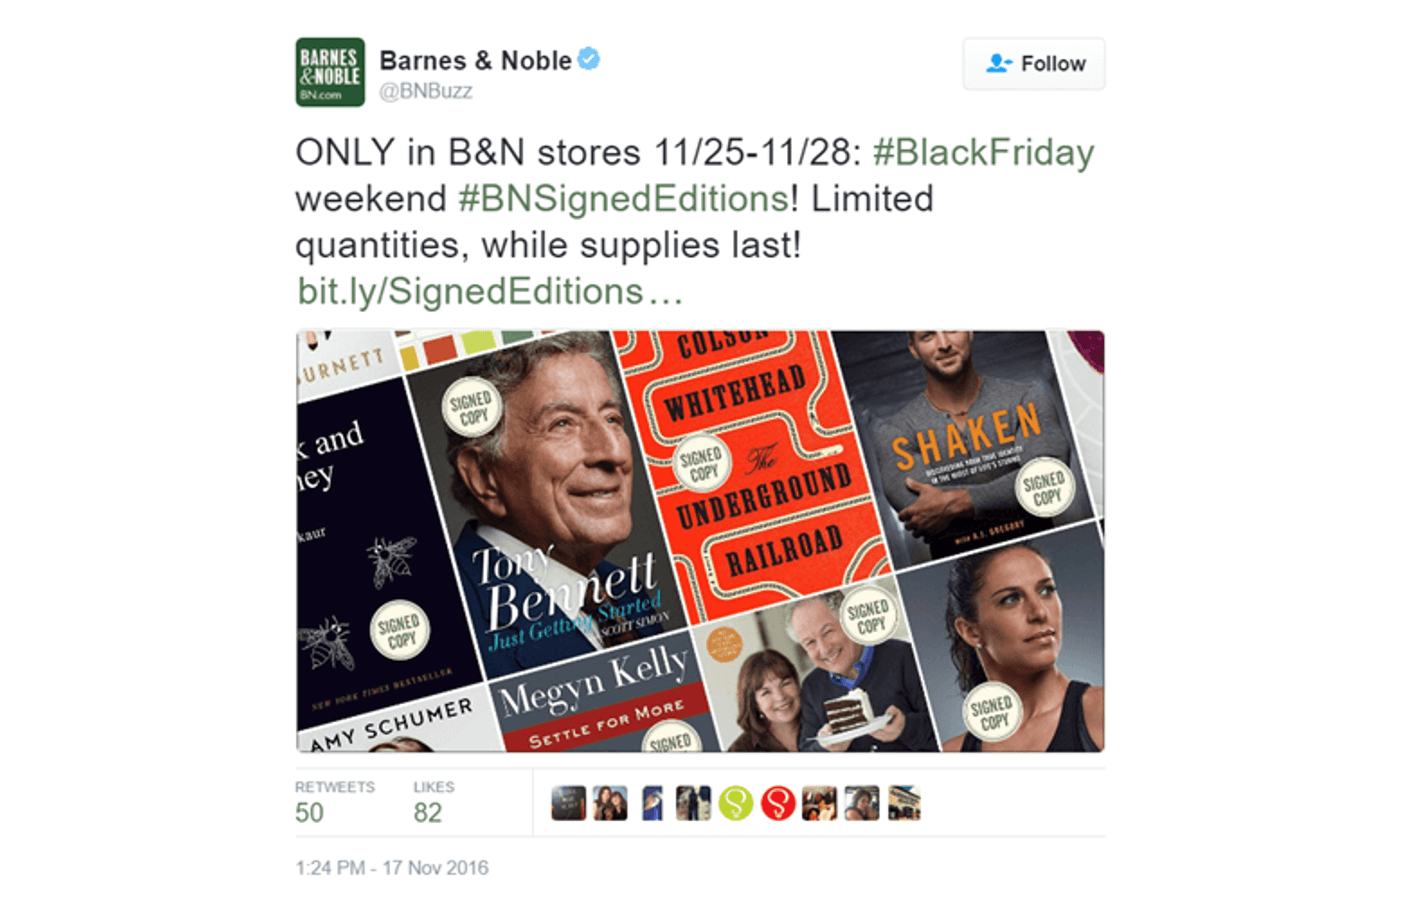 Barnes & Noble’s Black Friday post on Twitter announces the upcoming sales of the signed editions in their stores and warns that the quantities are limited